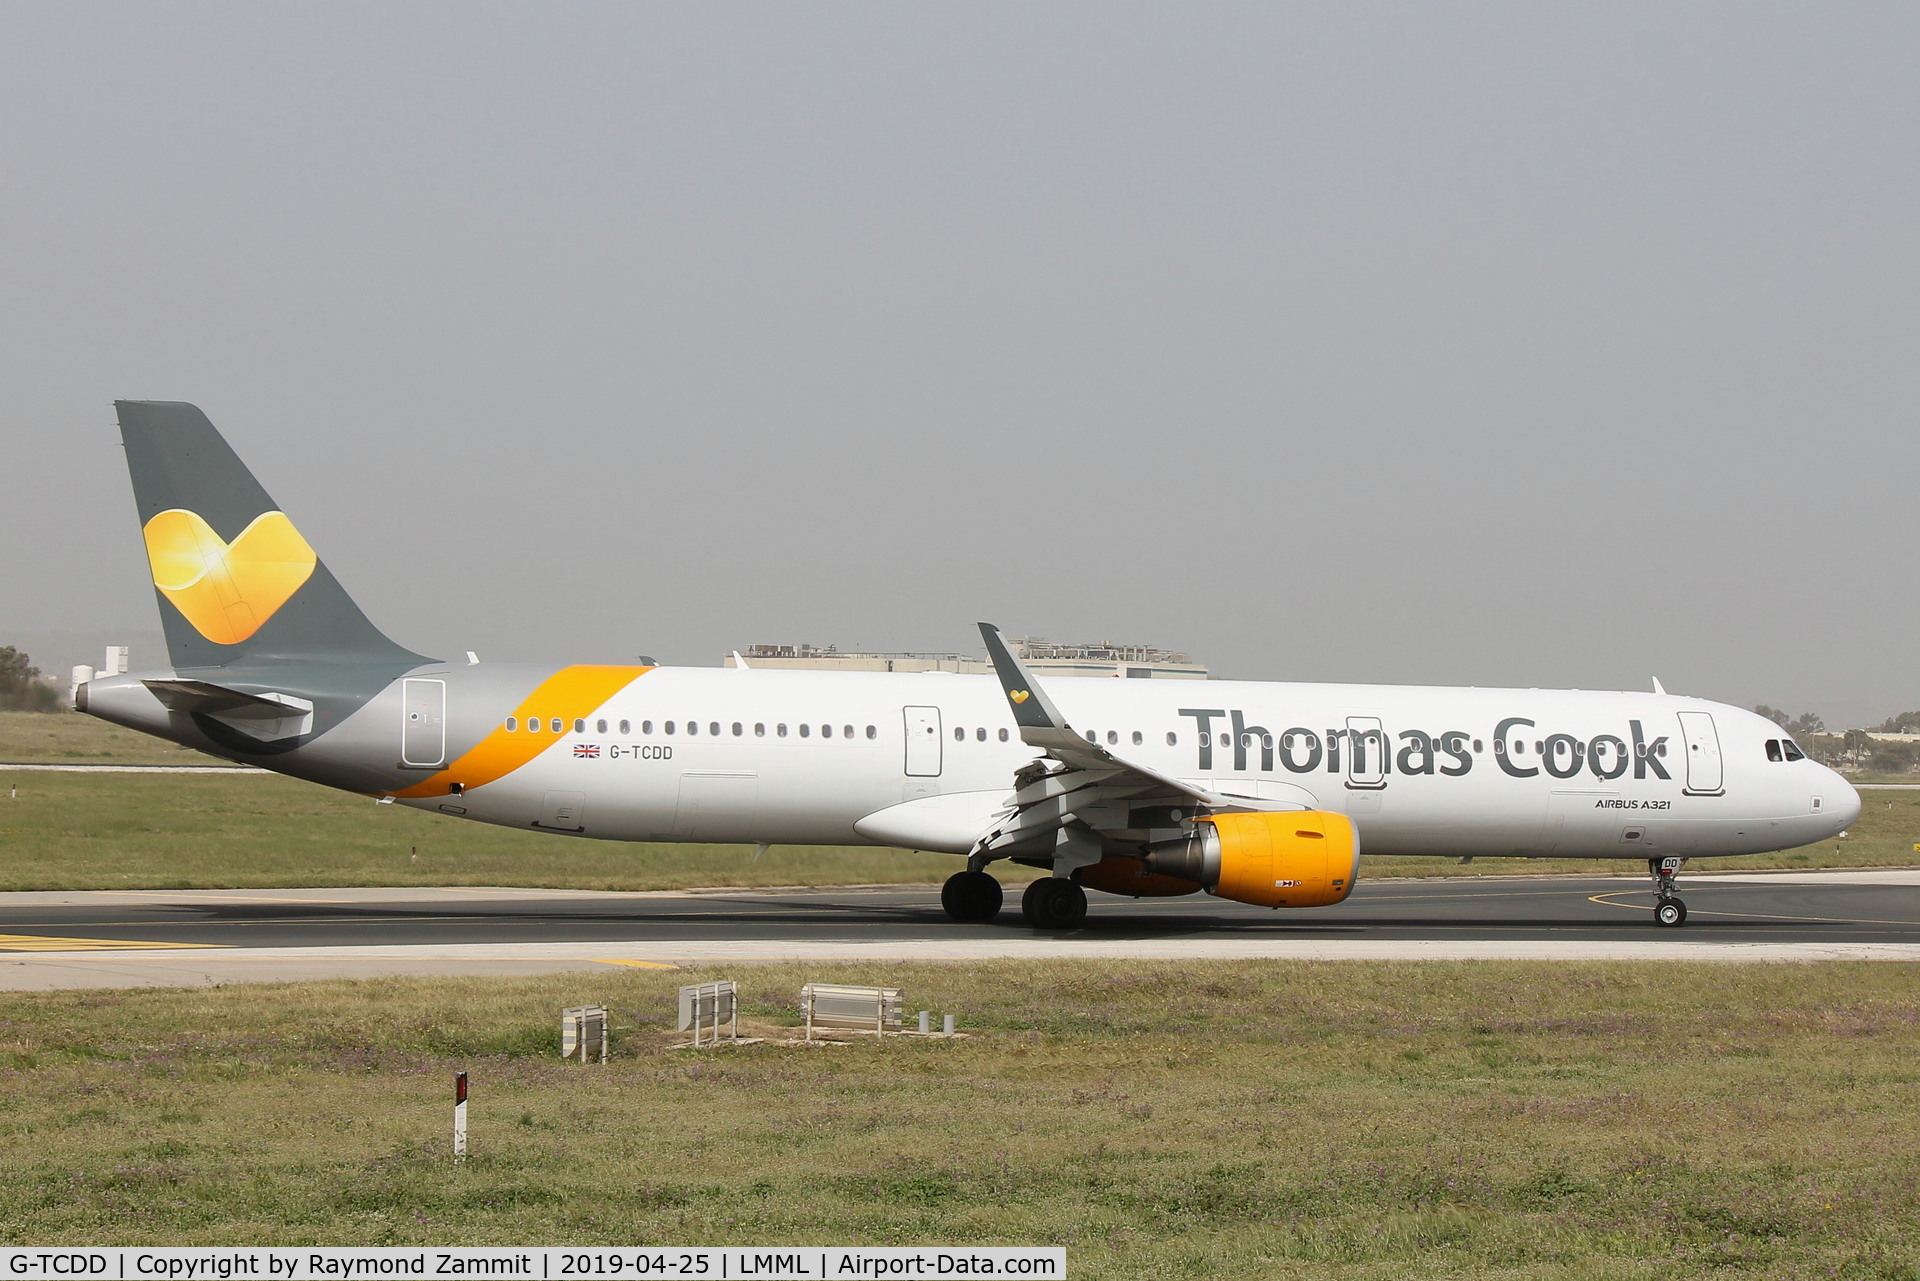 G-TCDD, 2014 Airbus A321-211 C/N 6038, A321 G-TCDD Thomas Cook Airlines